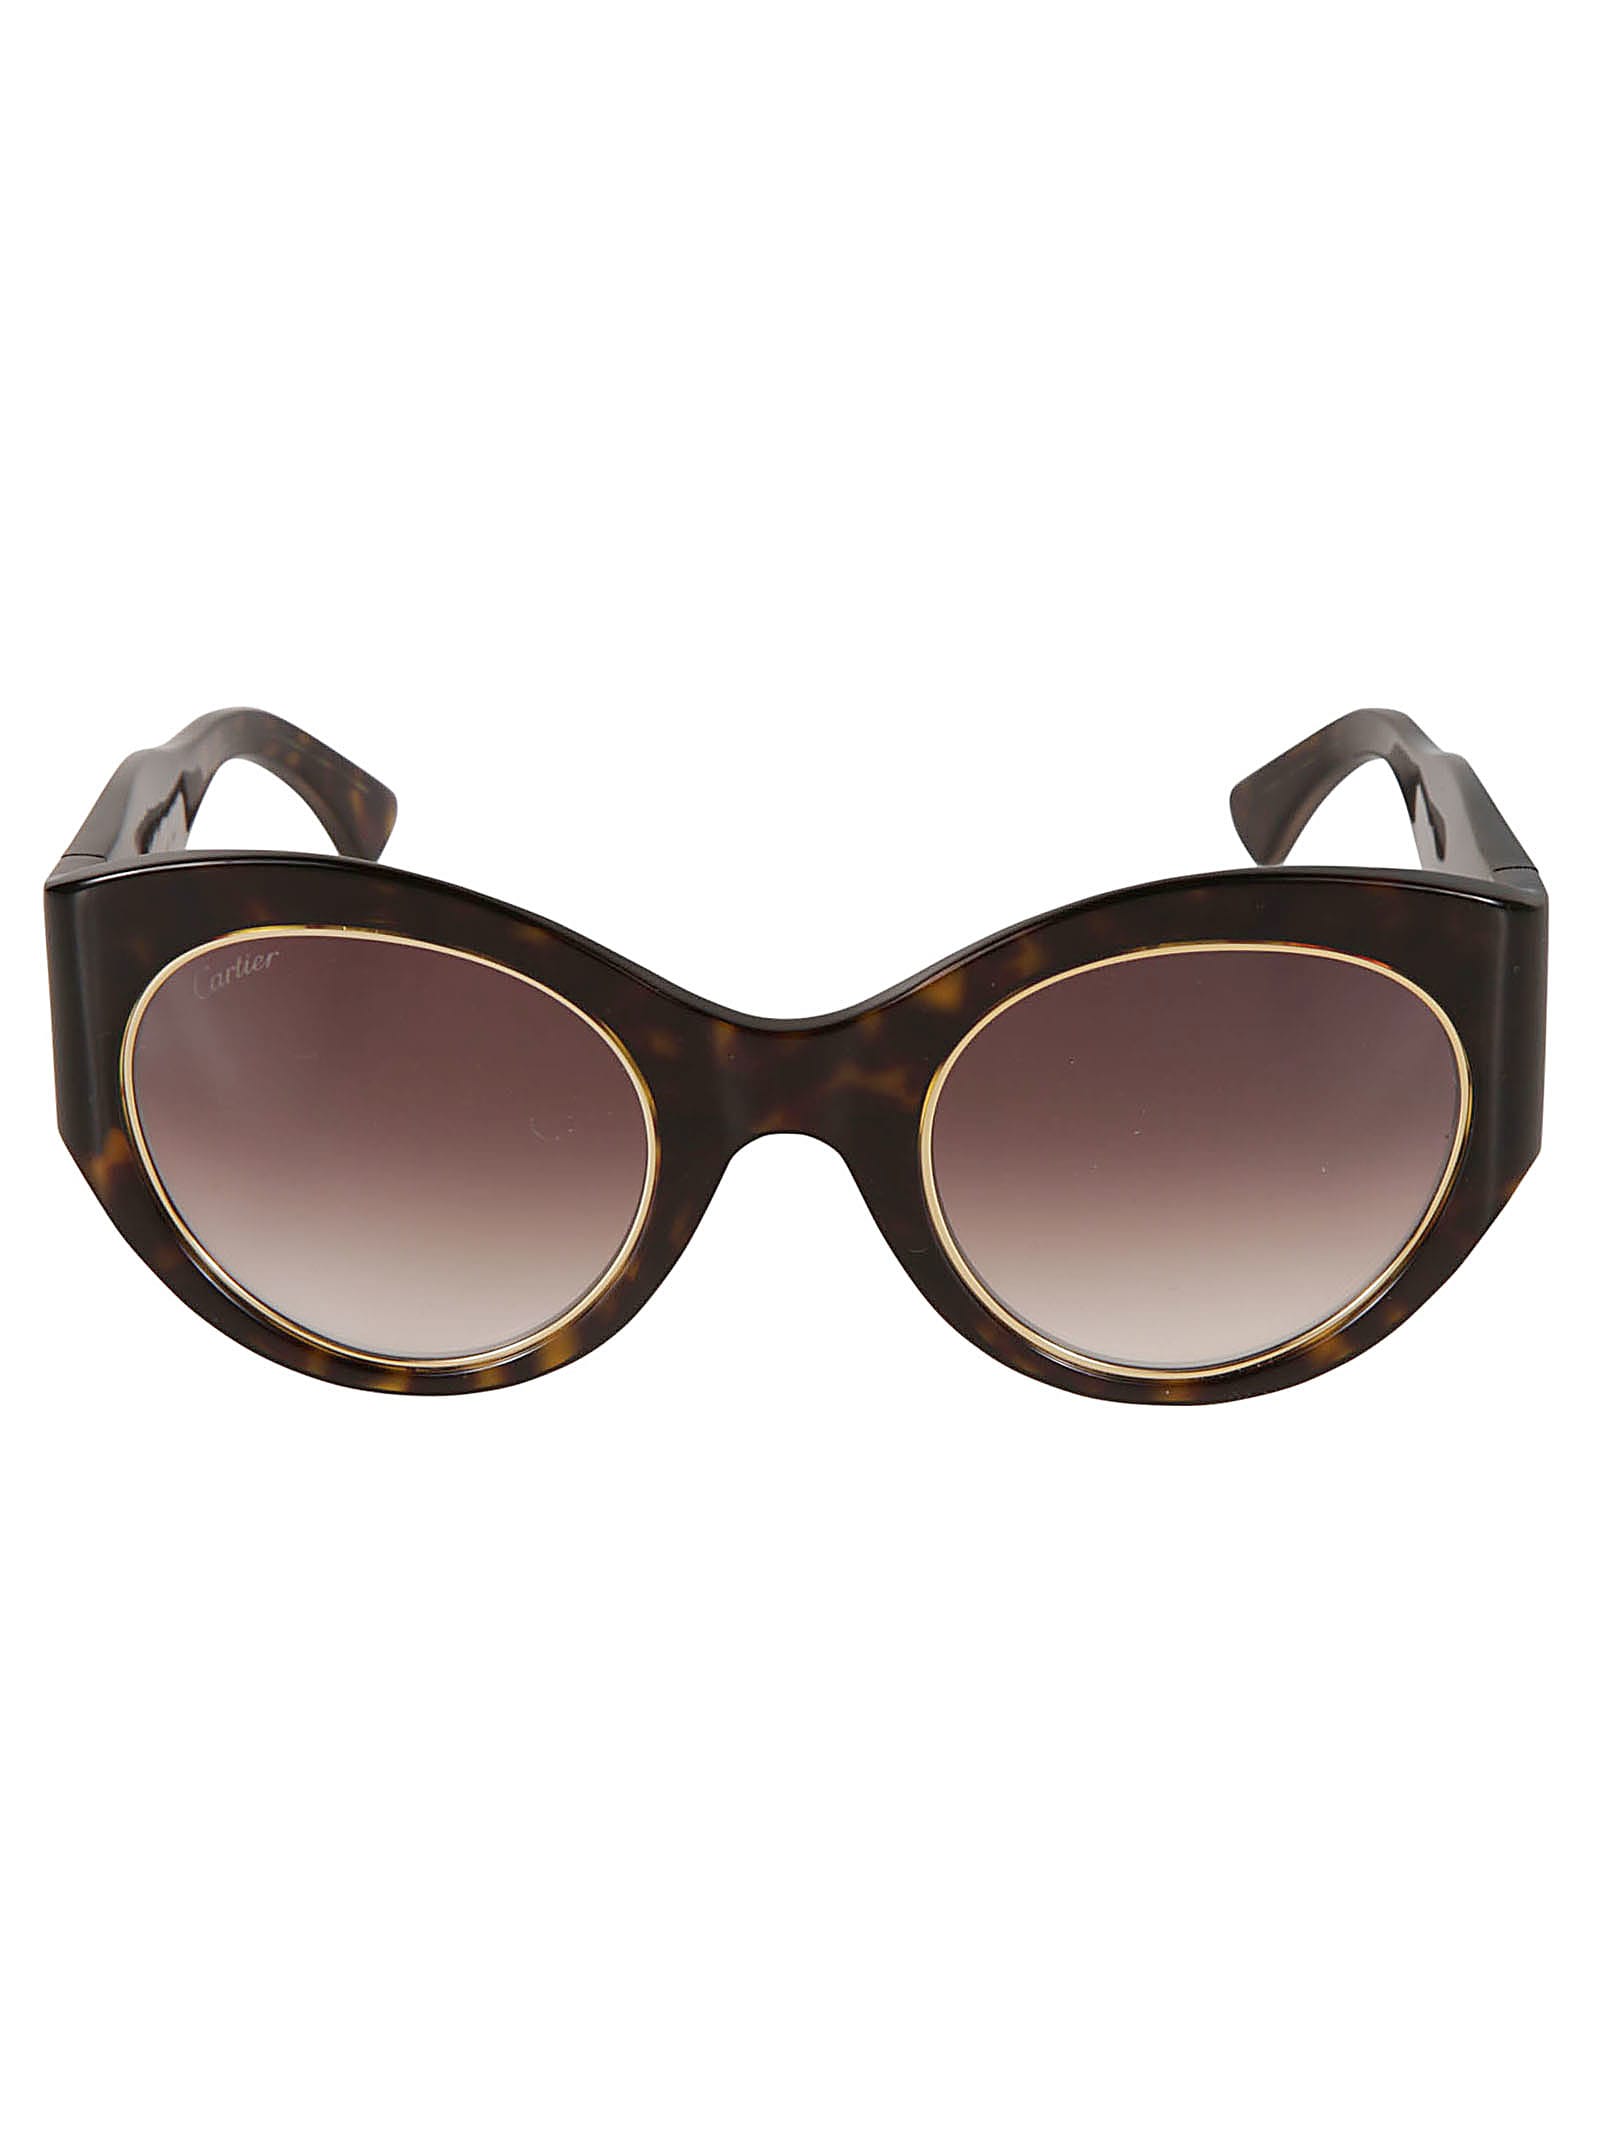 Cartier Cat-eye Round Glasses In Brown